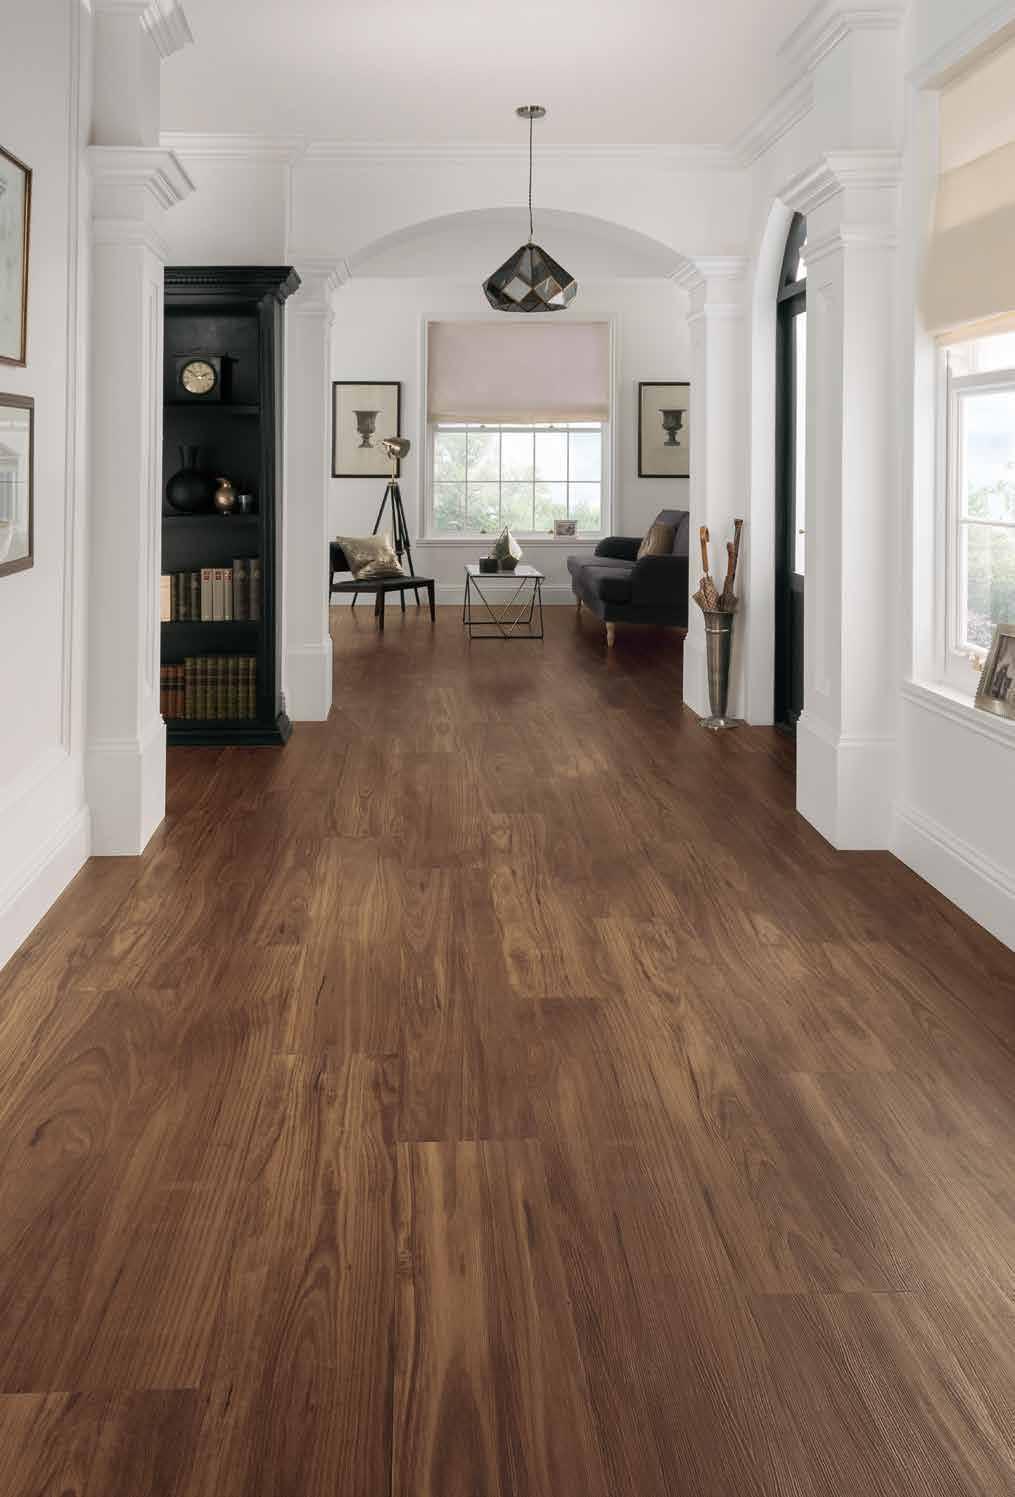 The deep, warm tones of this wood help to create a stylish yet